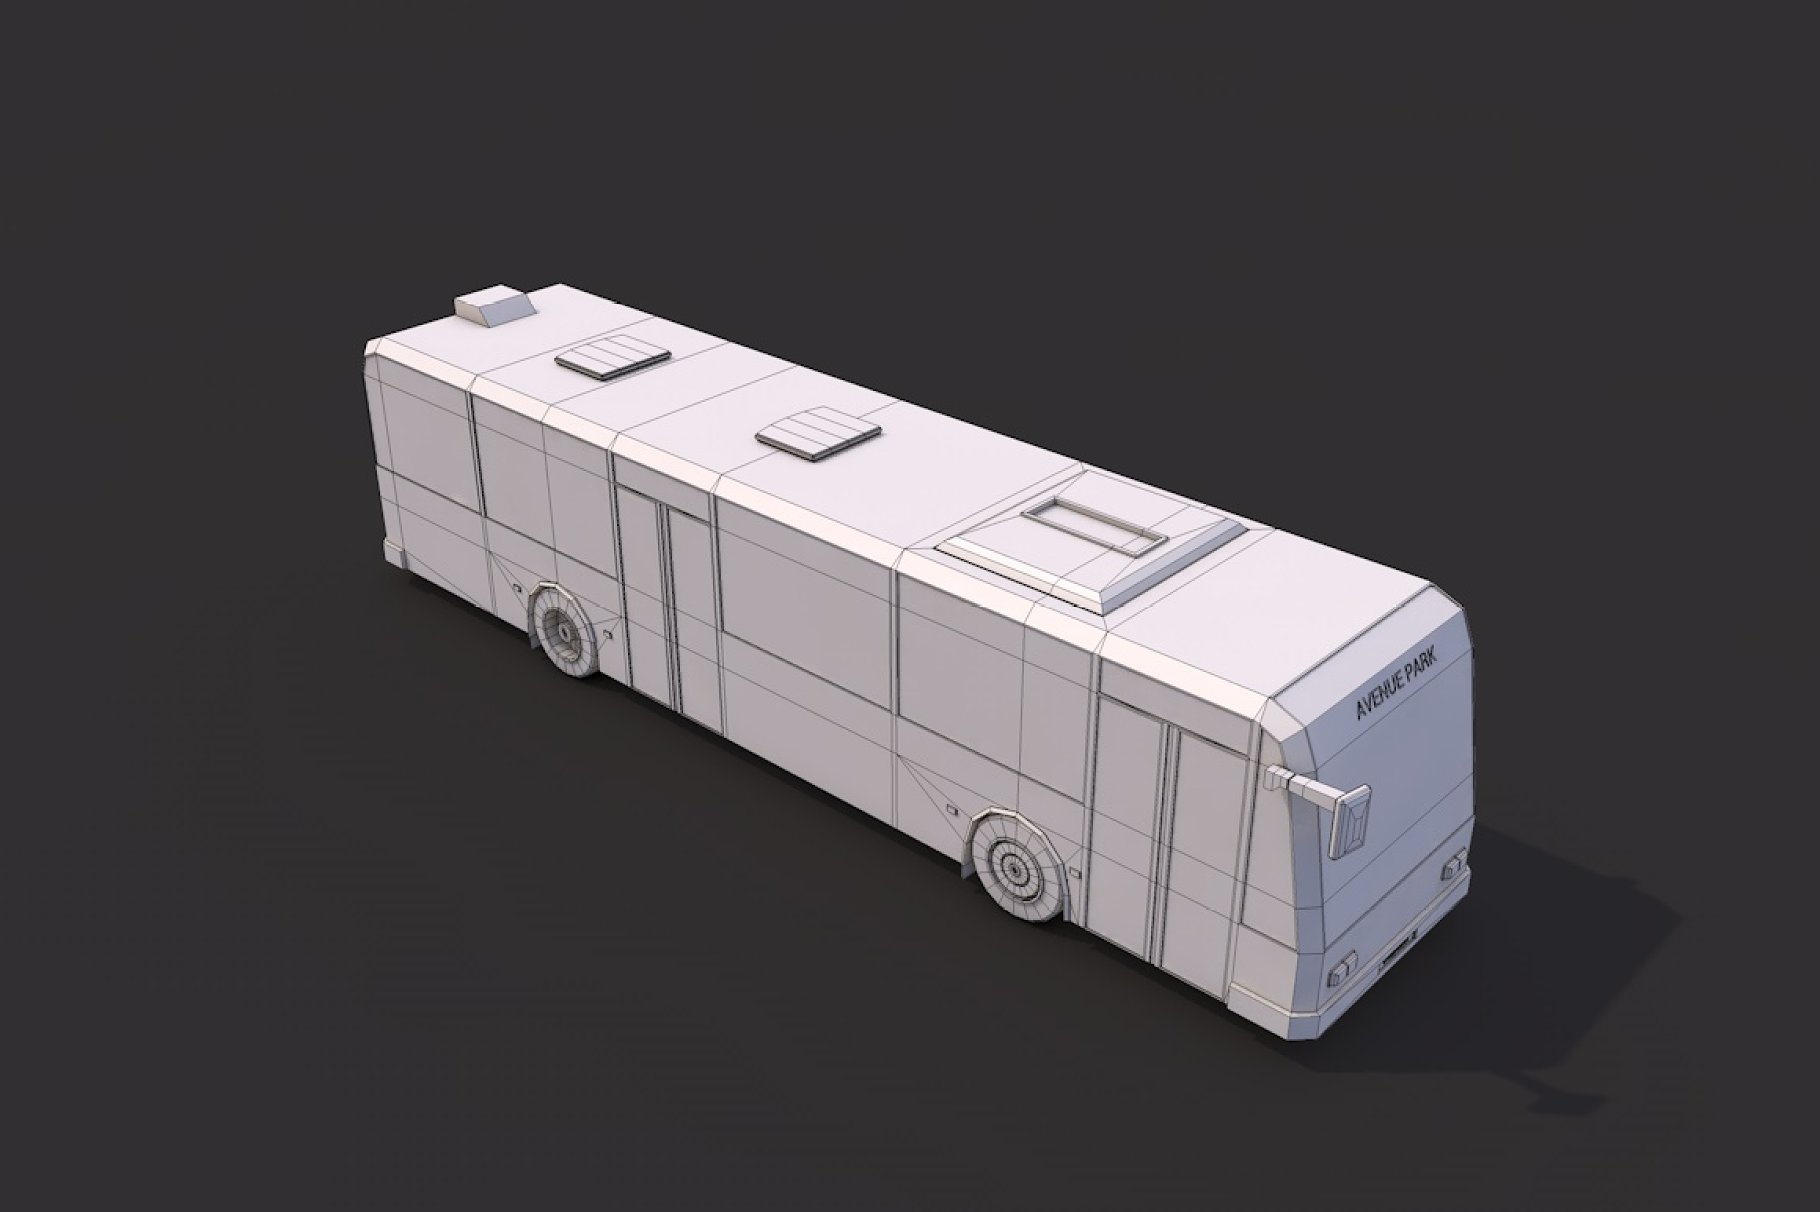 Grat low poly city bus front right mockup on a dark gray background.